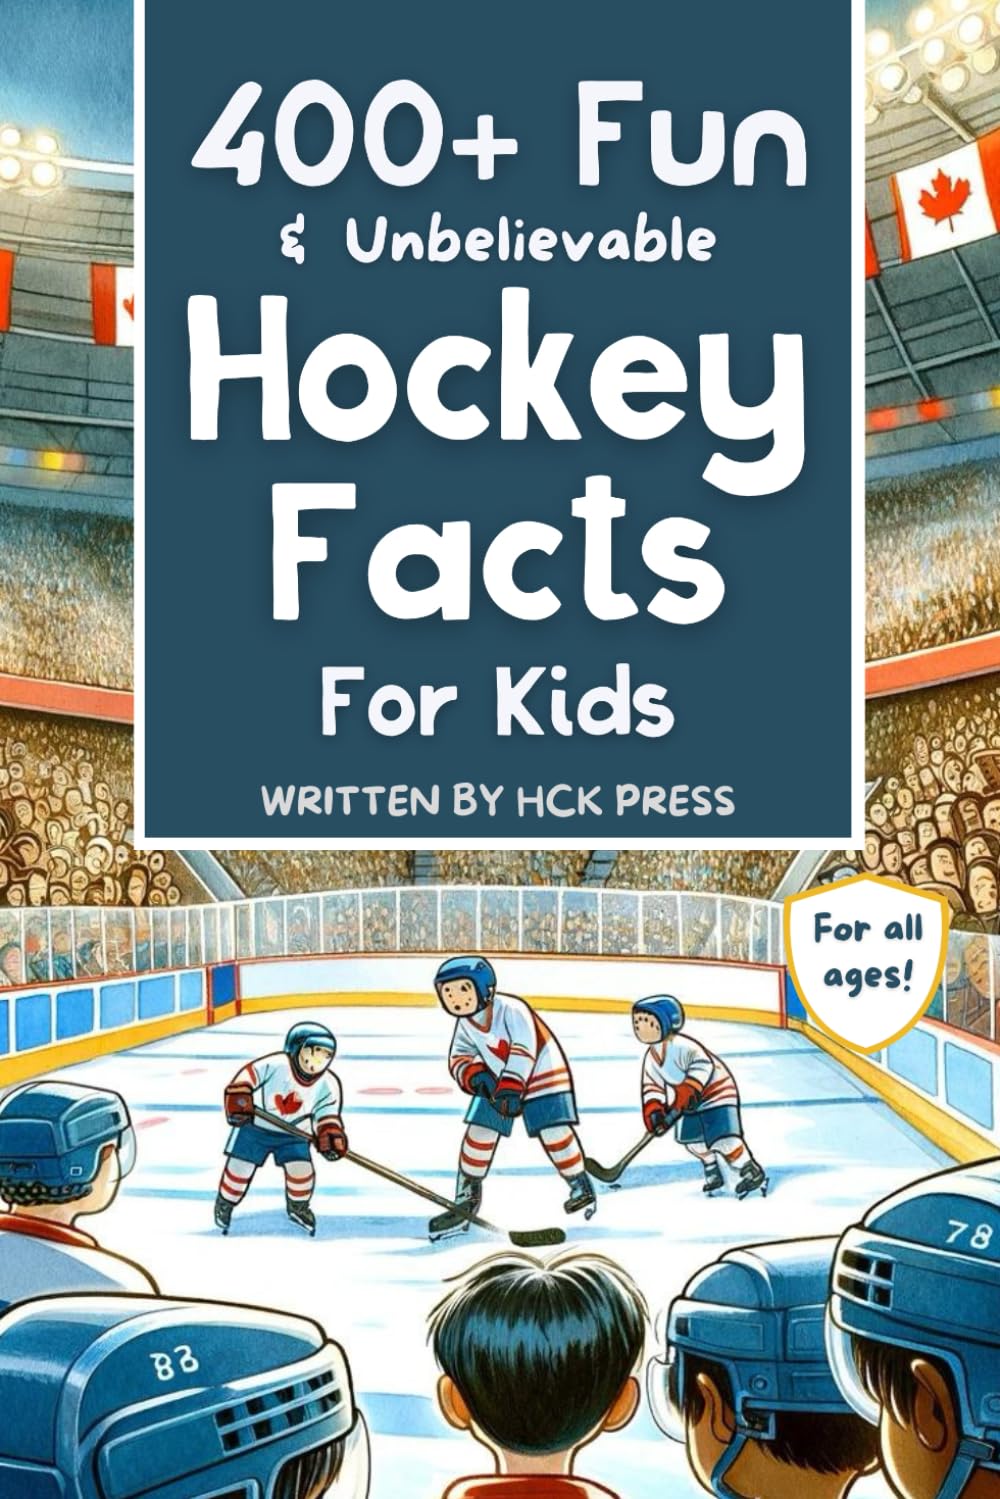 400+ Fun & Unbelievable Hockey Facts for Kids [112 페이지]